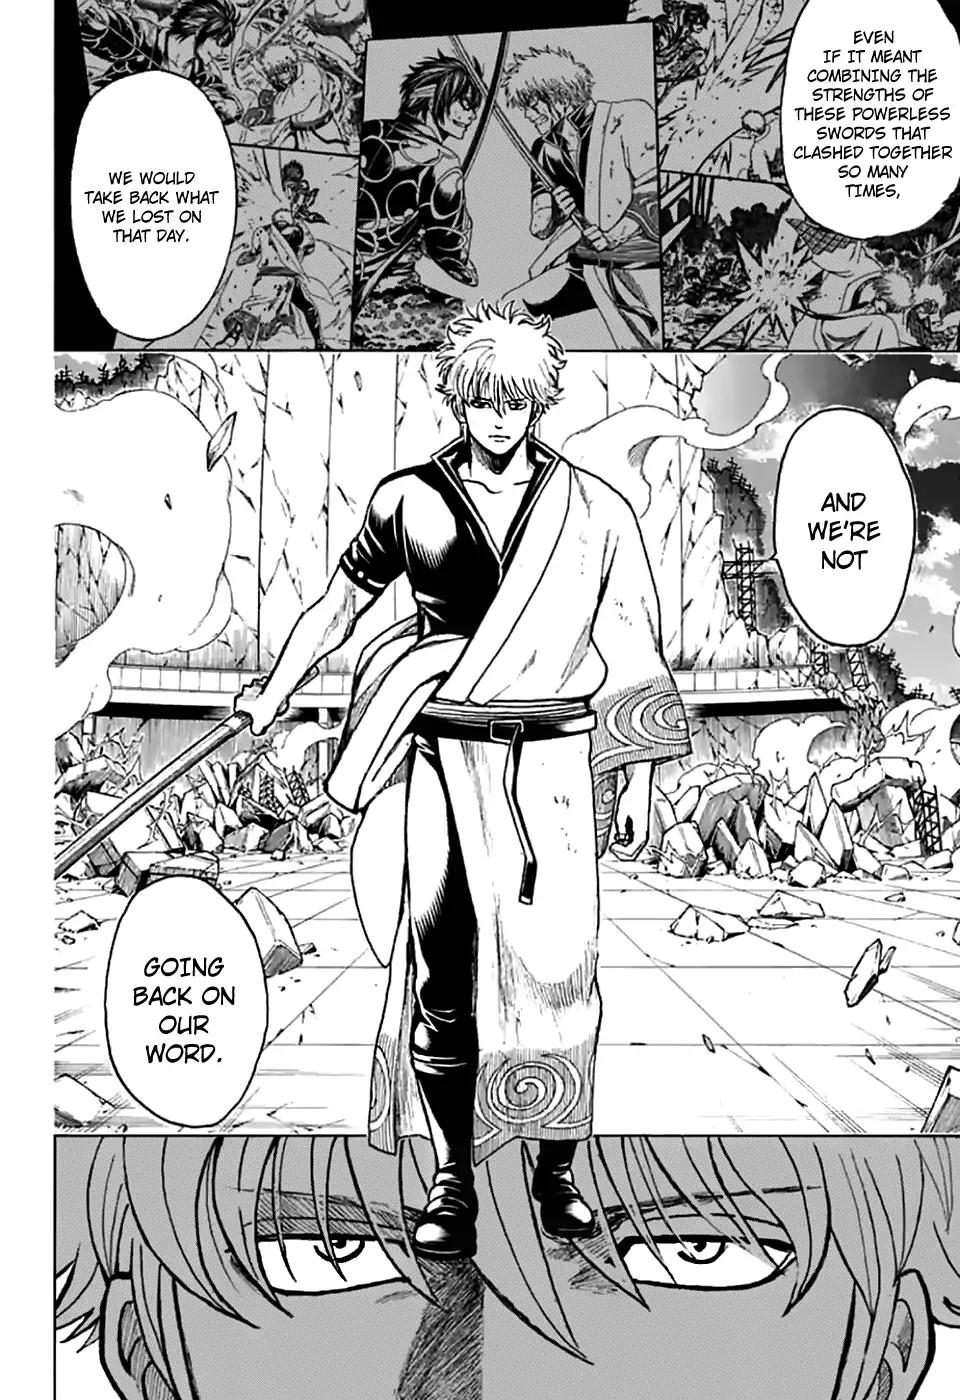 Gintama chapter 703 page 4